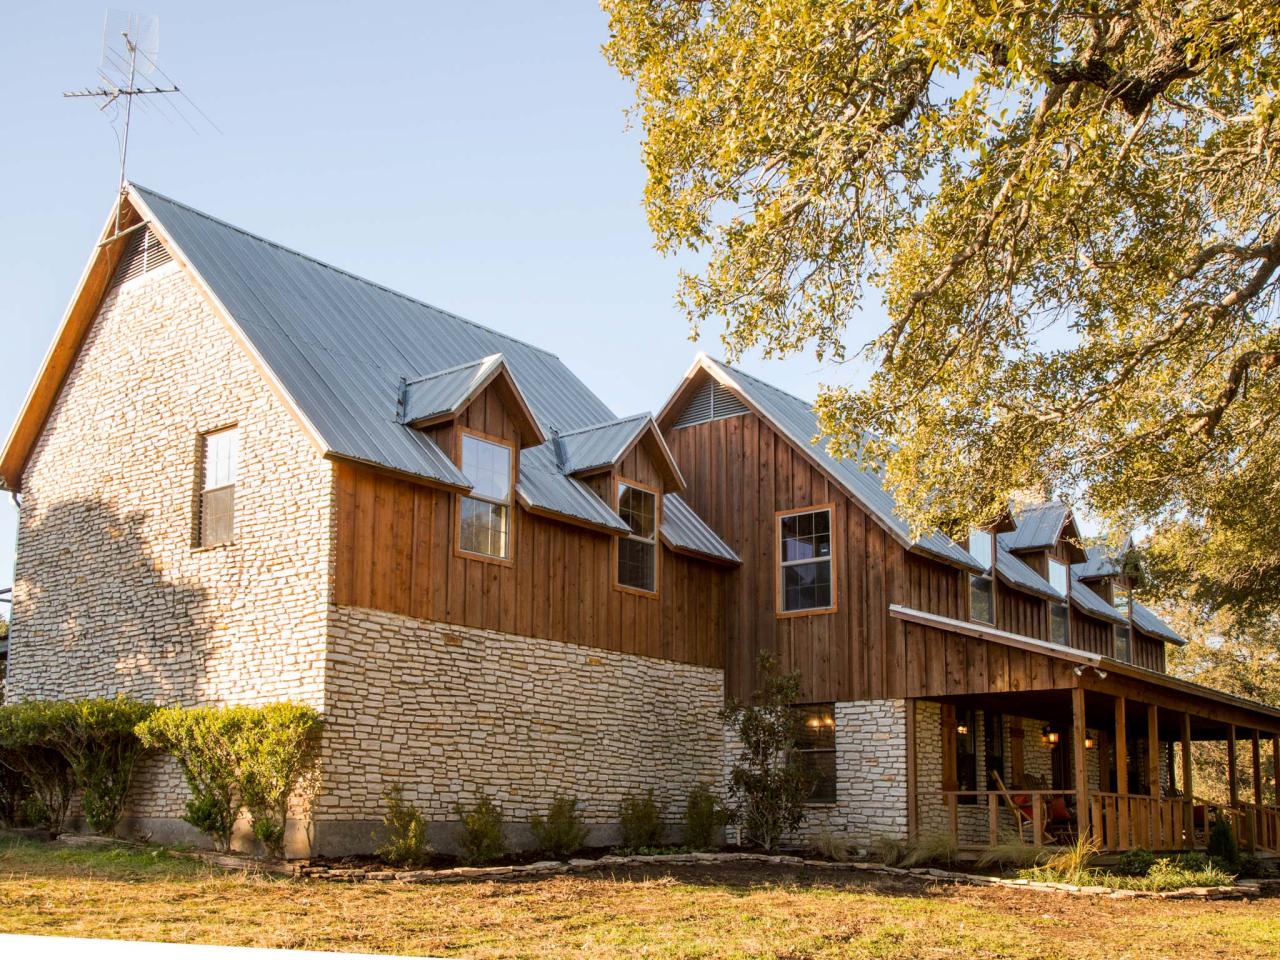 A home on HGTV's 'Fixer Upper'